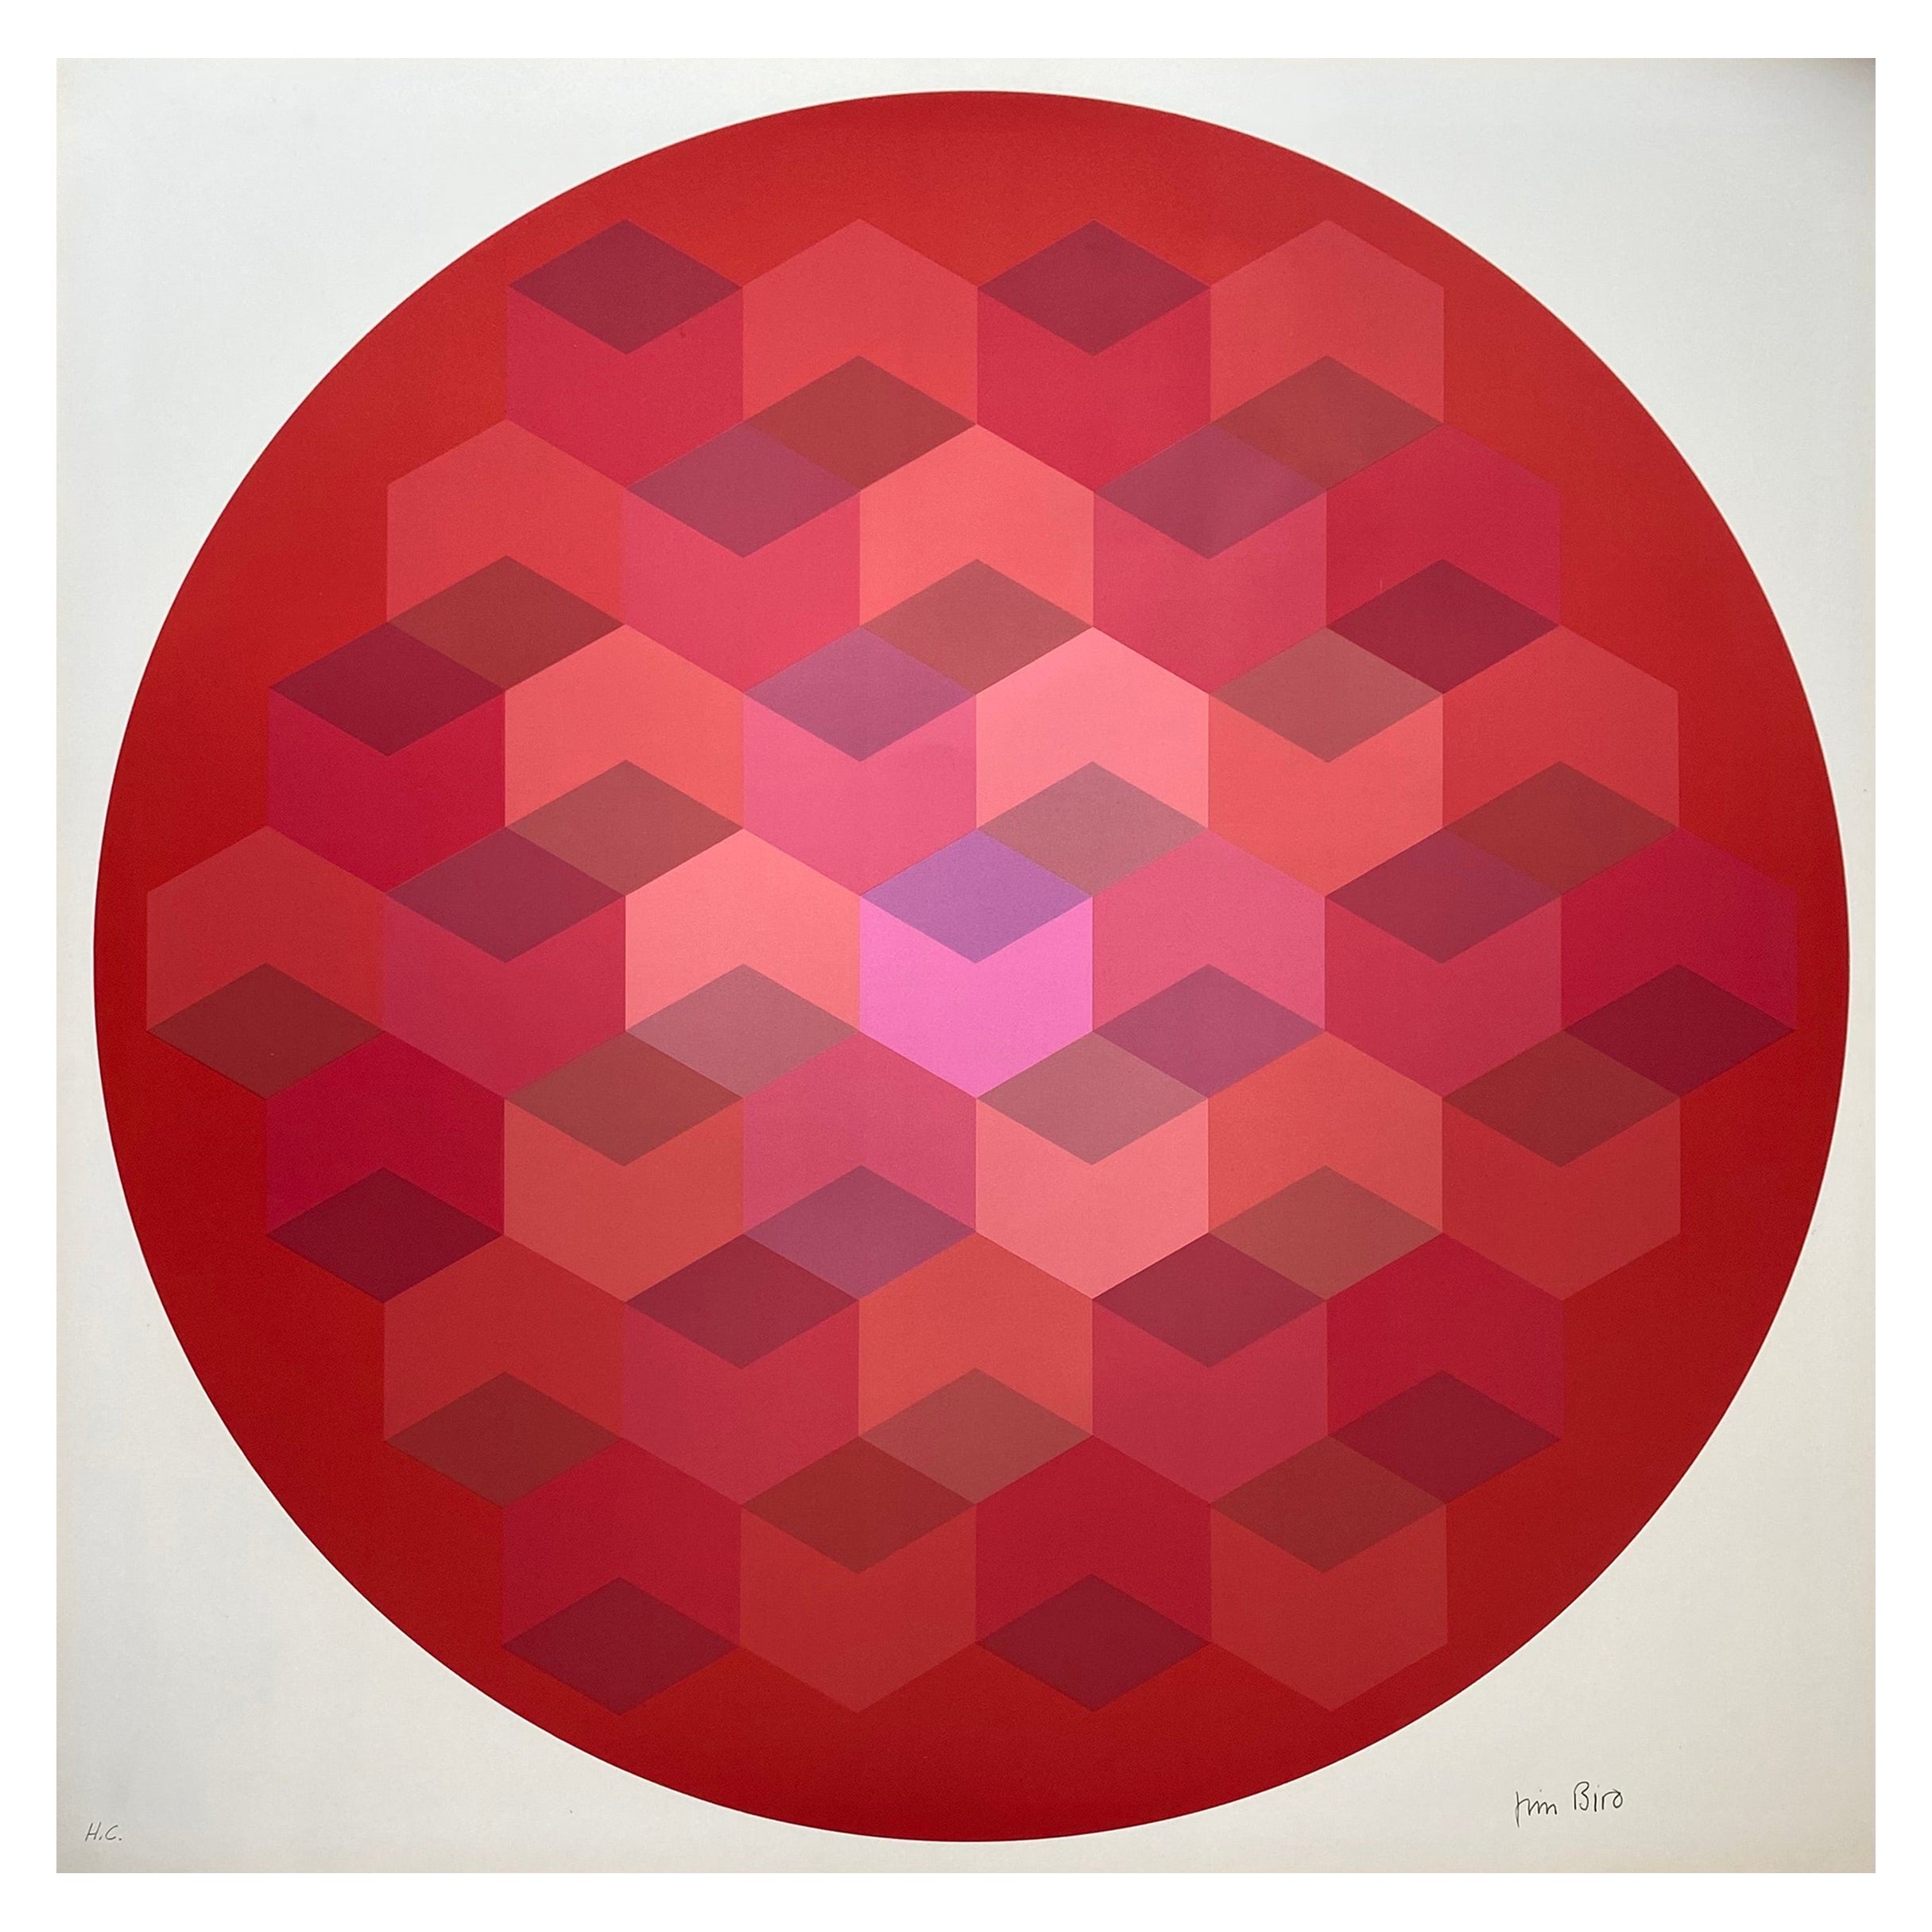 Jim Bird, Tribute to Vasarely 8, 1970 For Sale